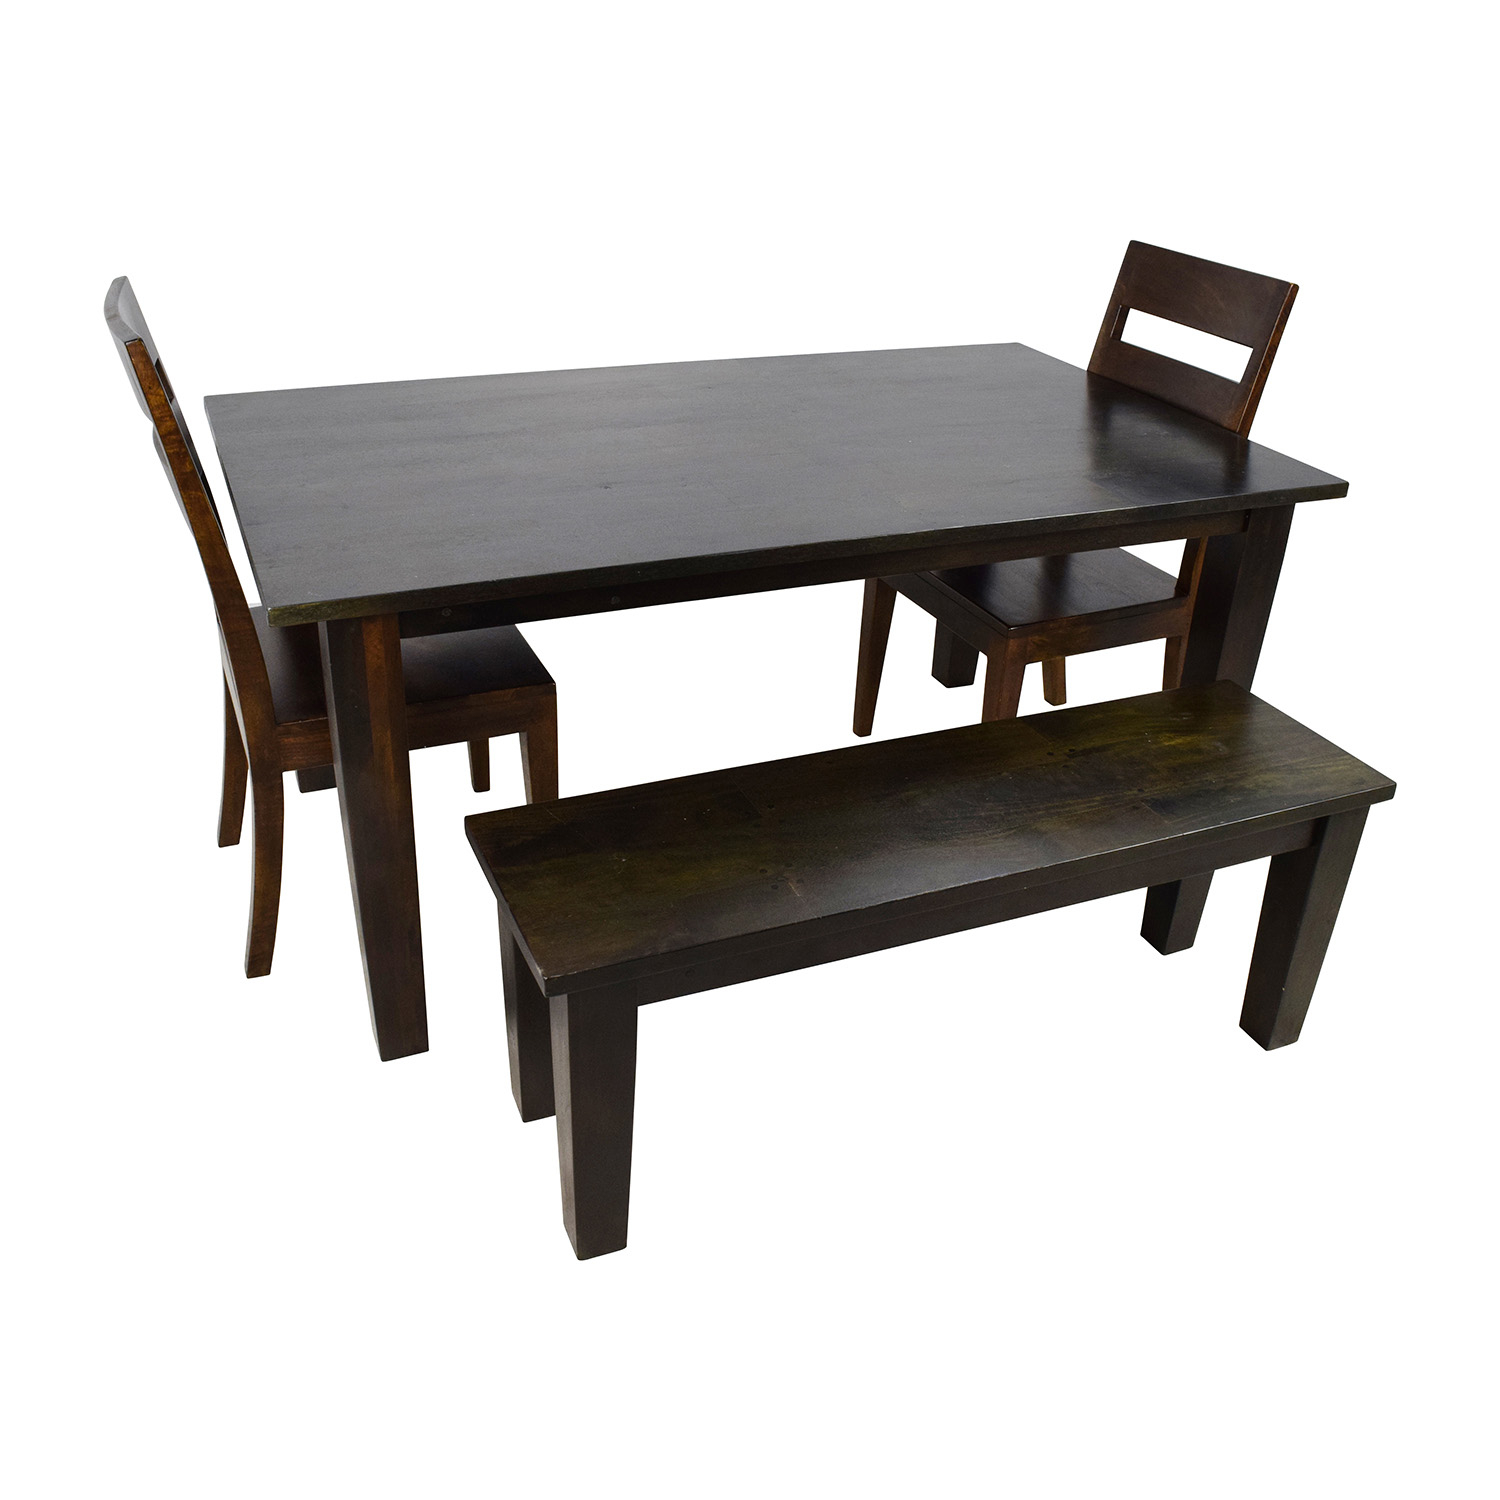 54 Off Crate Barrel Crate Barrel Basque Java Dining Table Set Tables intended for proportions 1500 X 1500